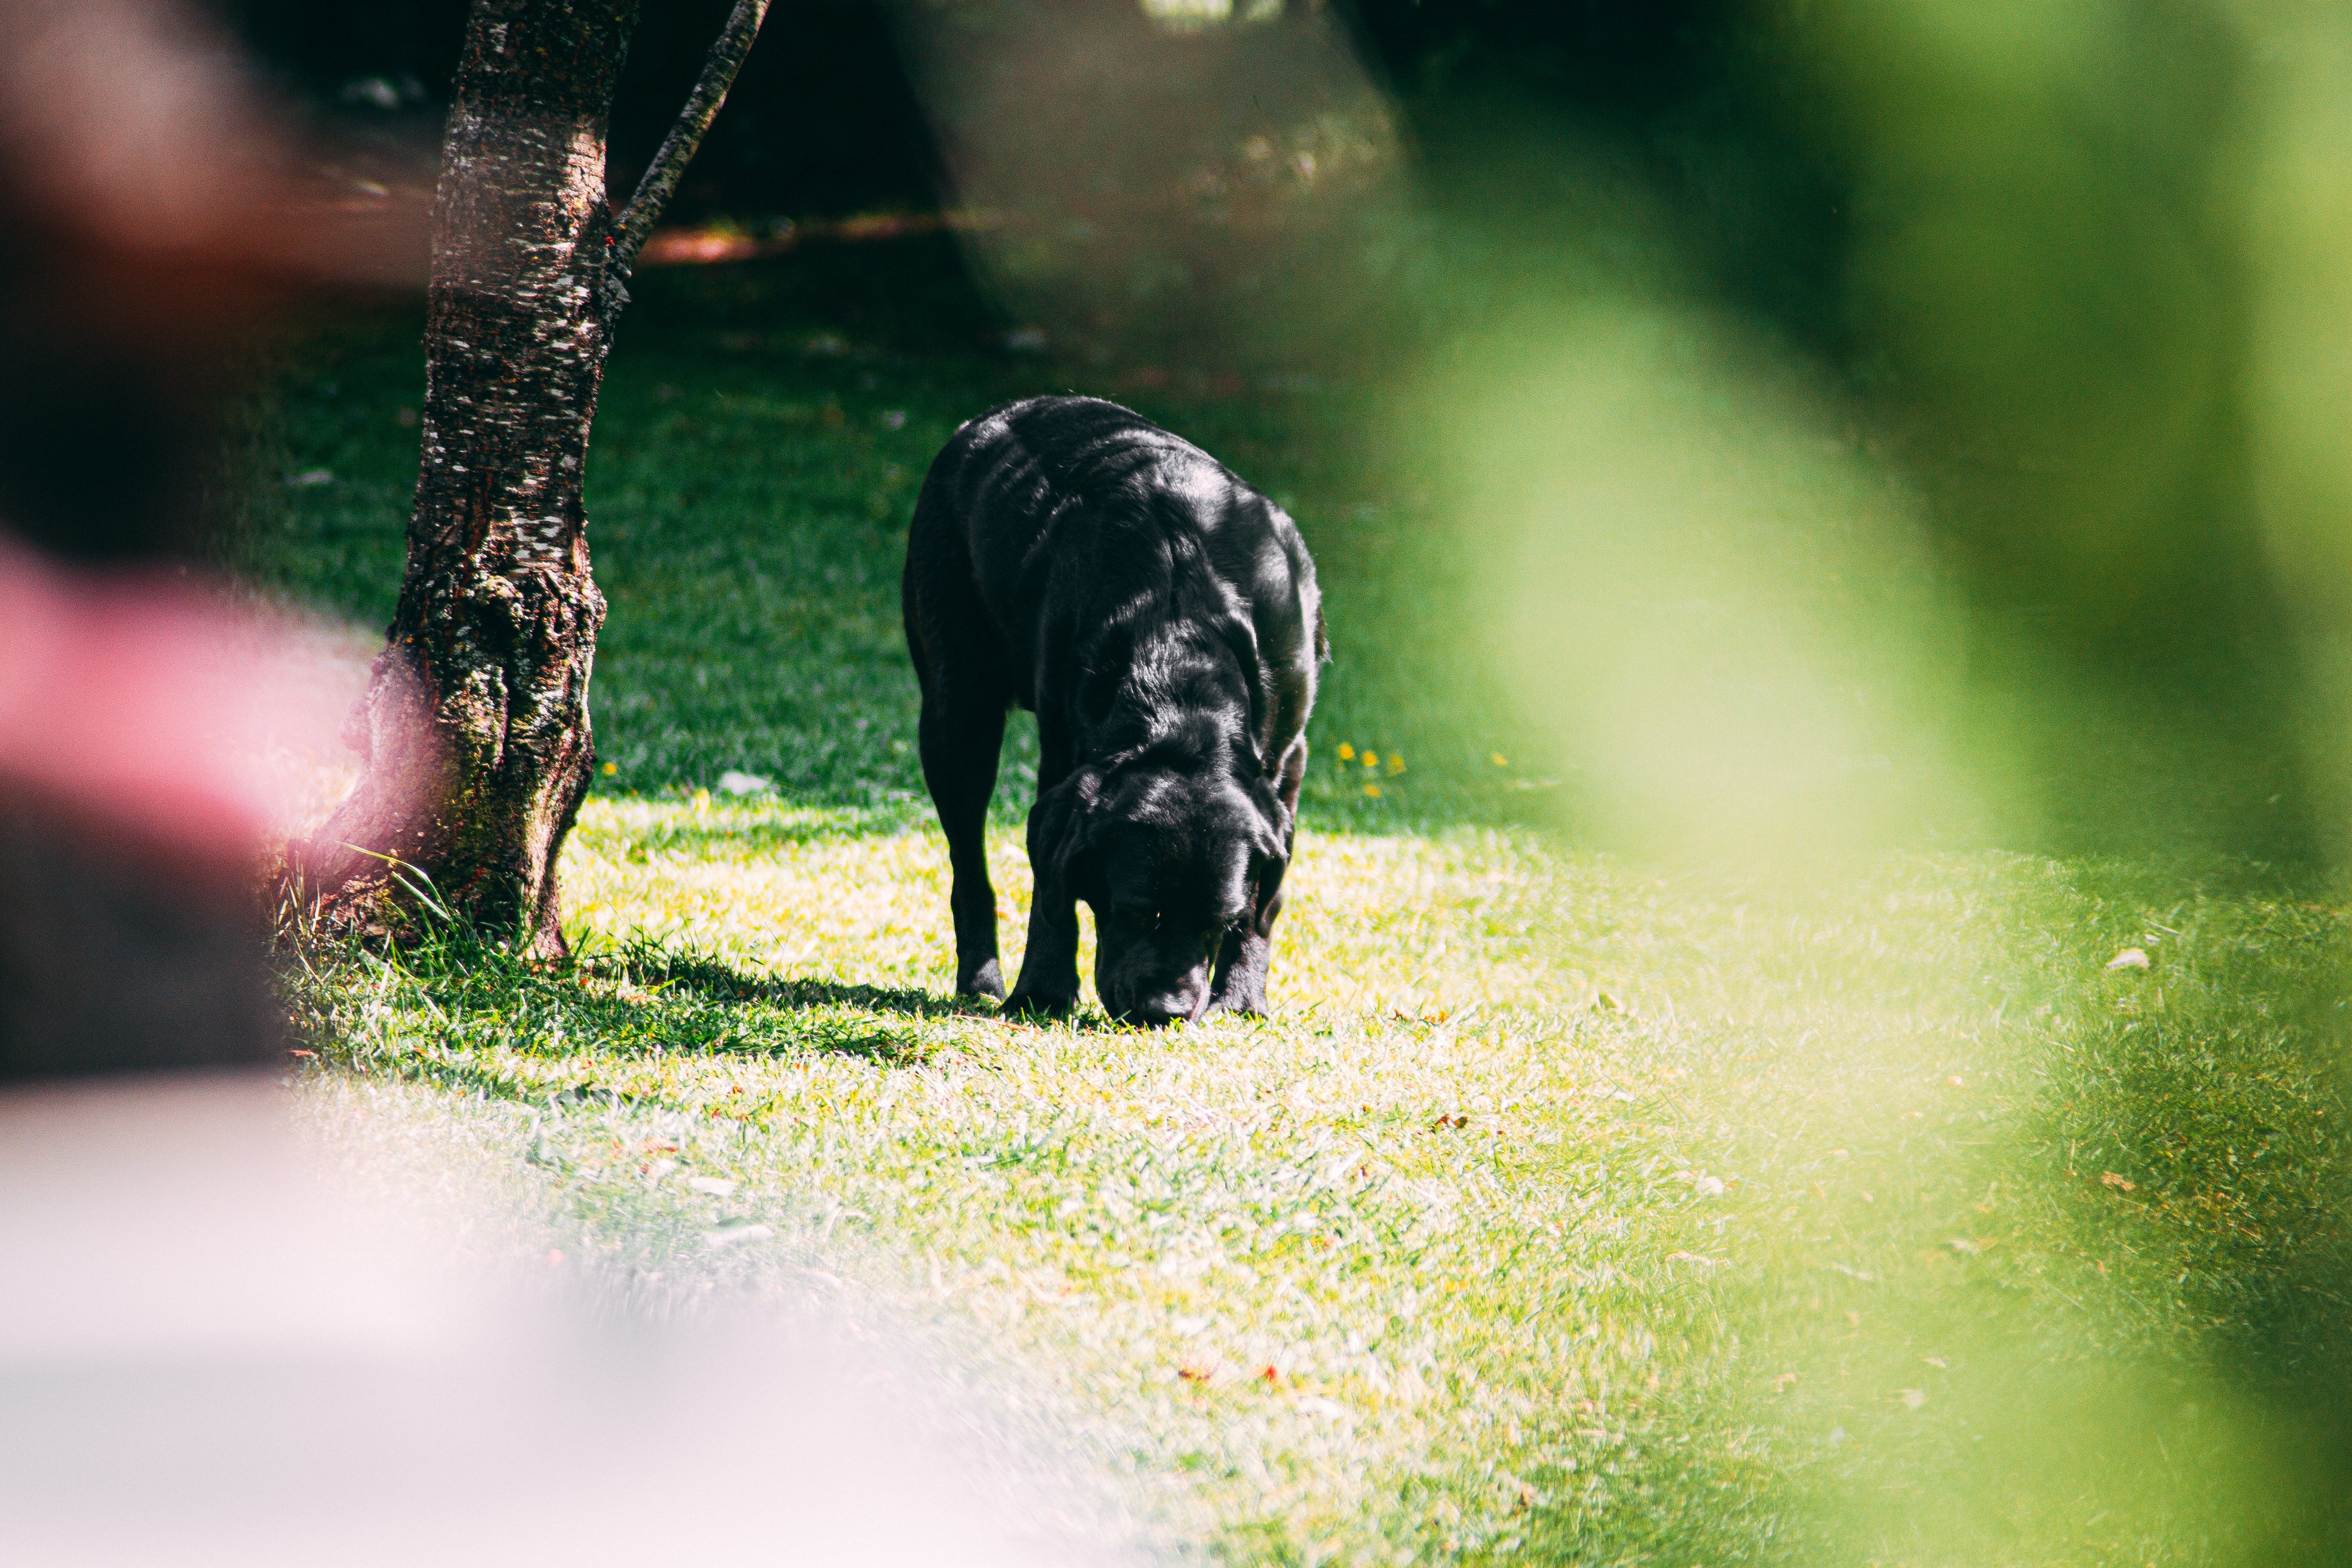 A neighbor spotted her dog sniffing onto something & walked over to check it out | Photo: Pexels